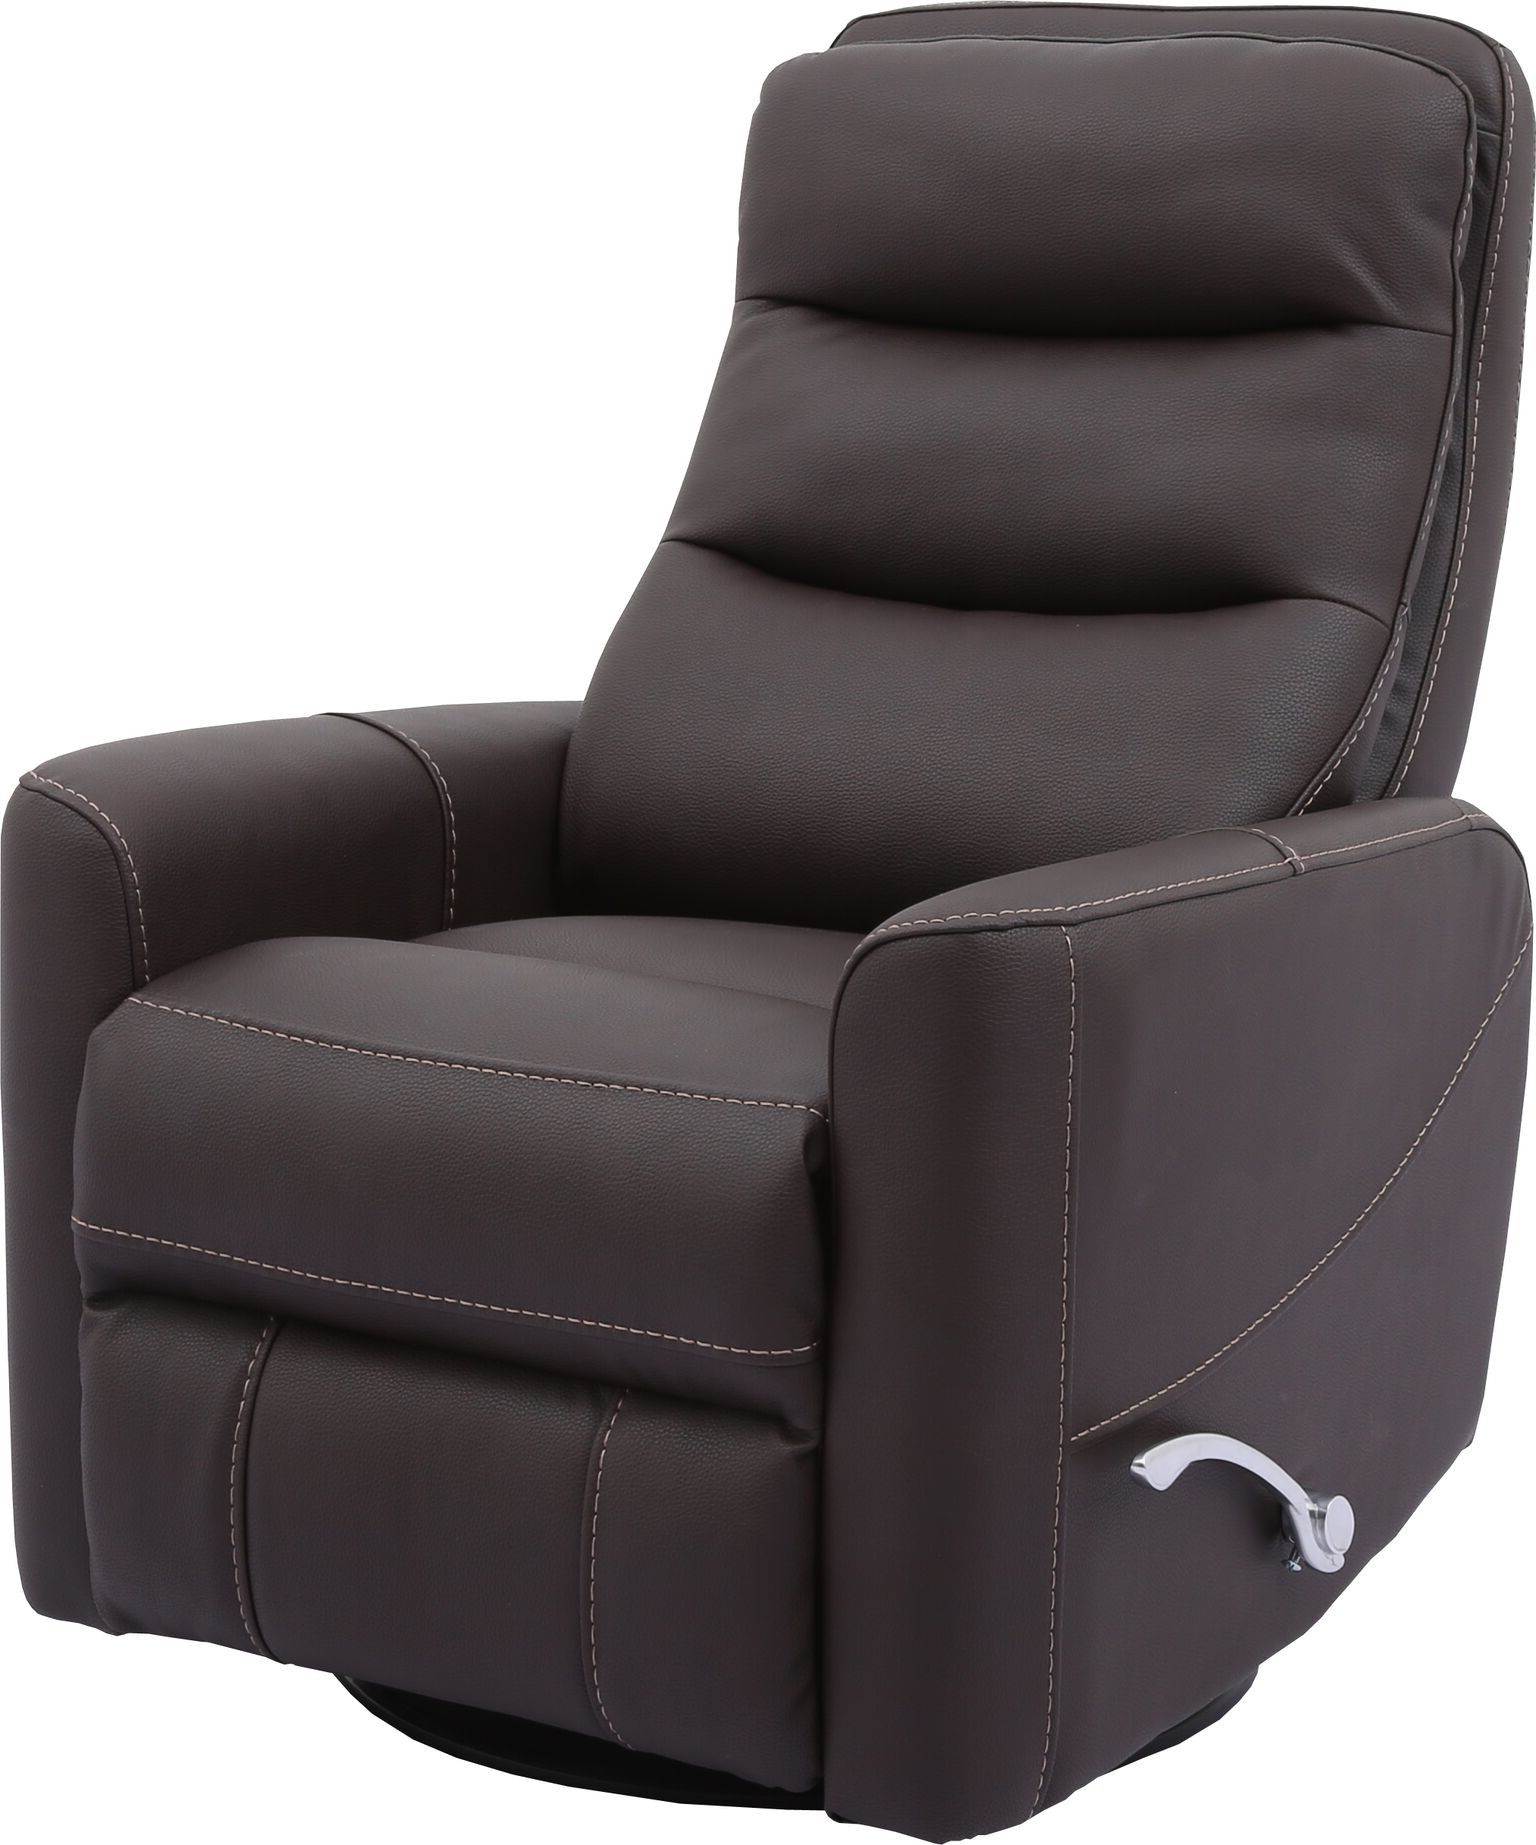 Hercules Grey Swivel Glider Recliners Inside Fashionable Hercules  Chocolate  Swivel Glider Recliner With Articulating Headrest (View 3 of 20)